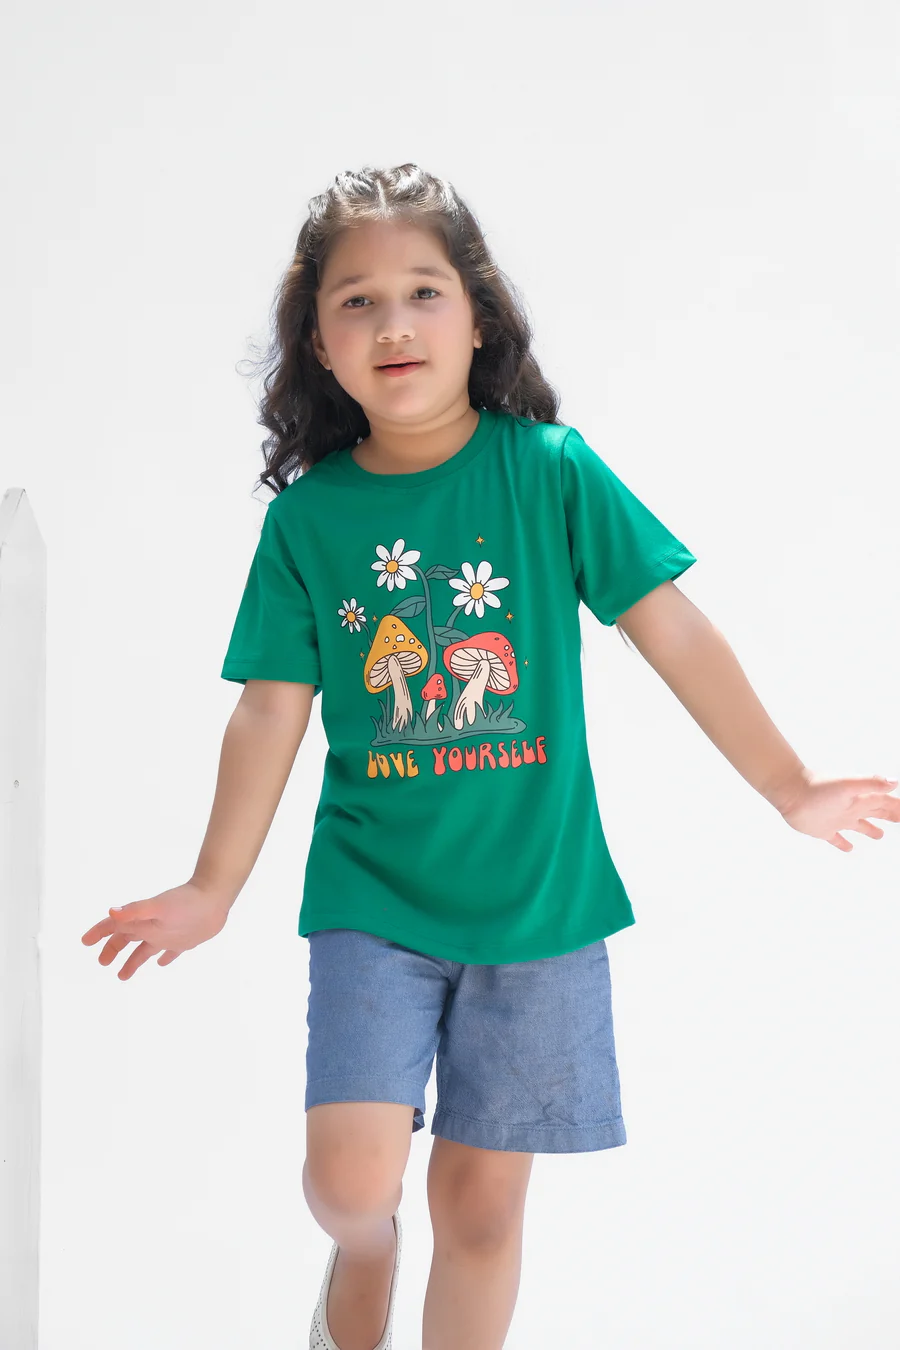 Love Yourself - Half Sleeves T-Shirts For Kids - Green - SBT-341